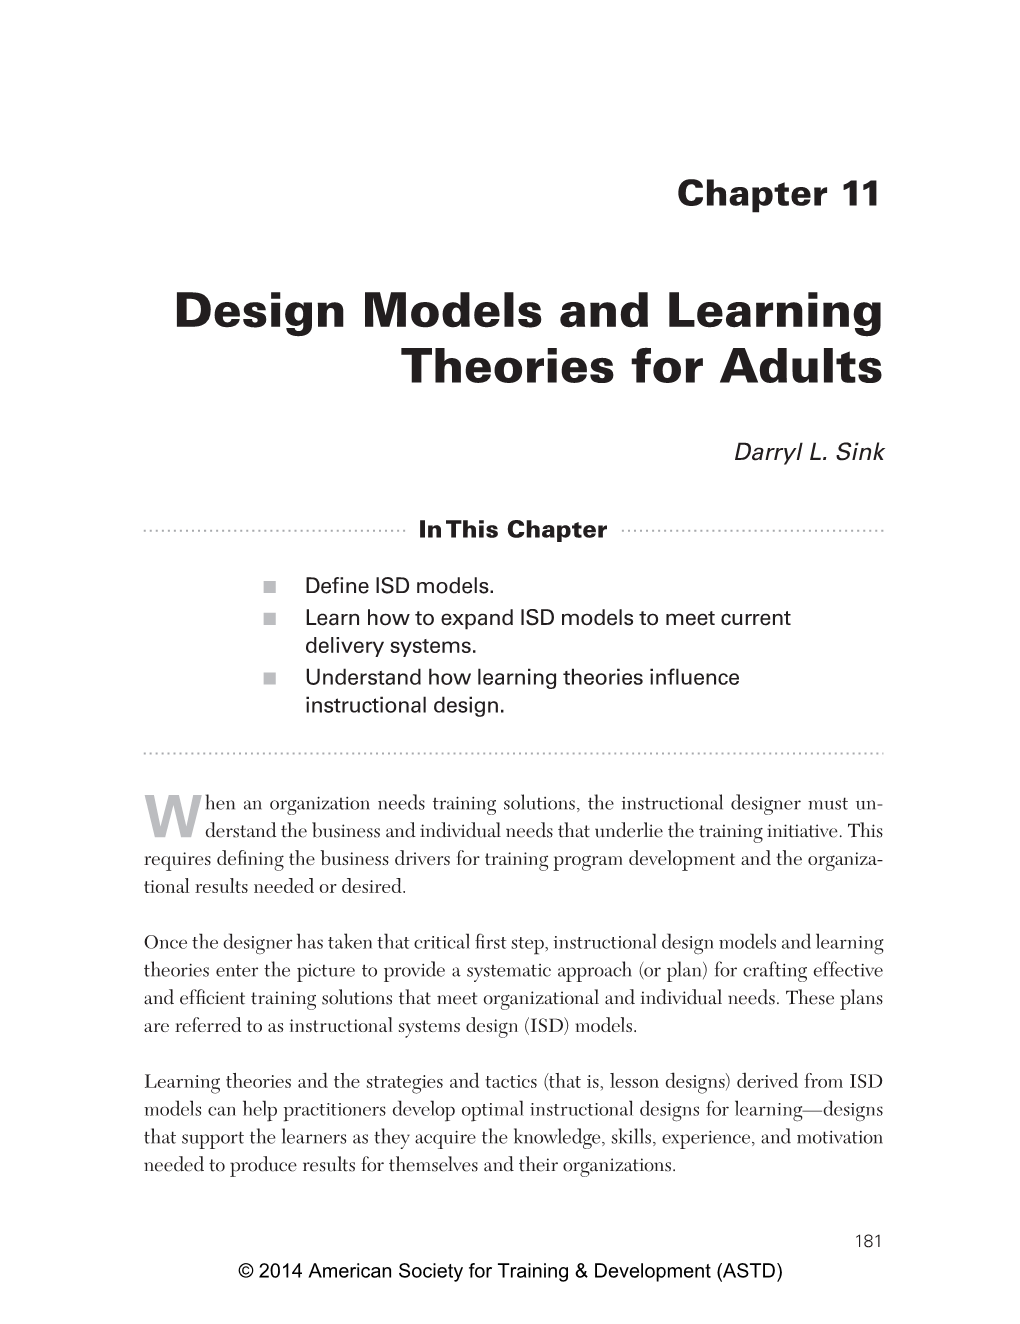 Design Models and Learning Theories for Adults